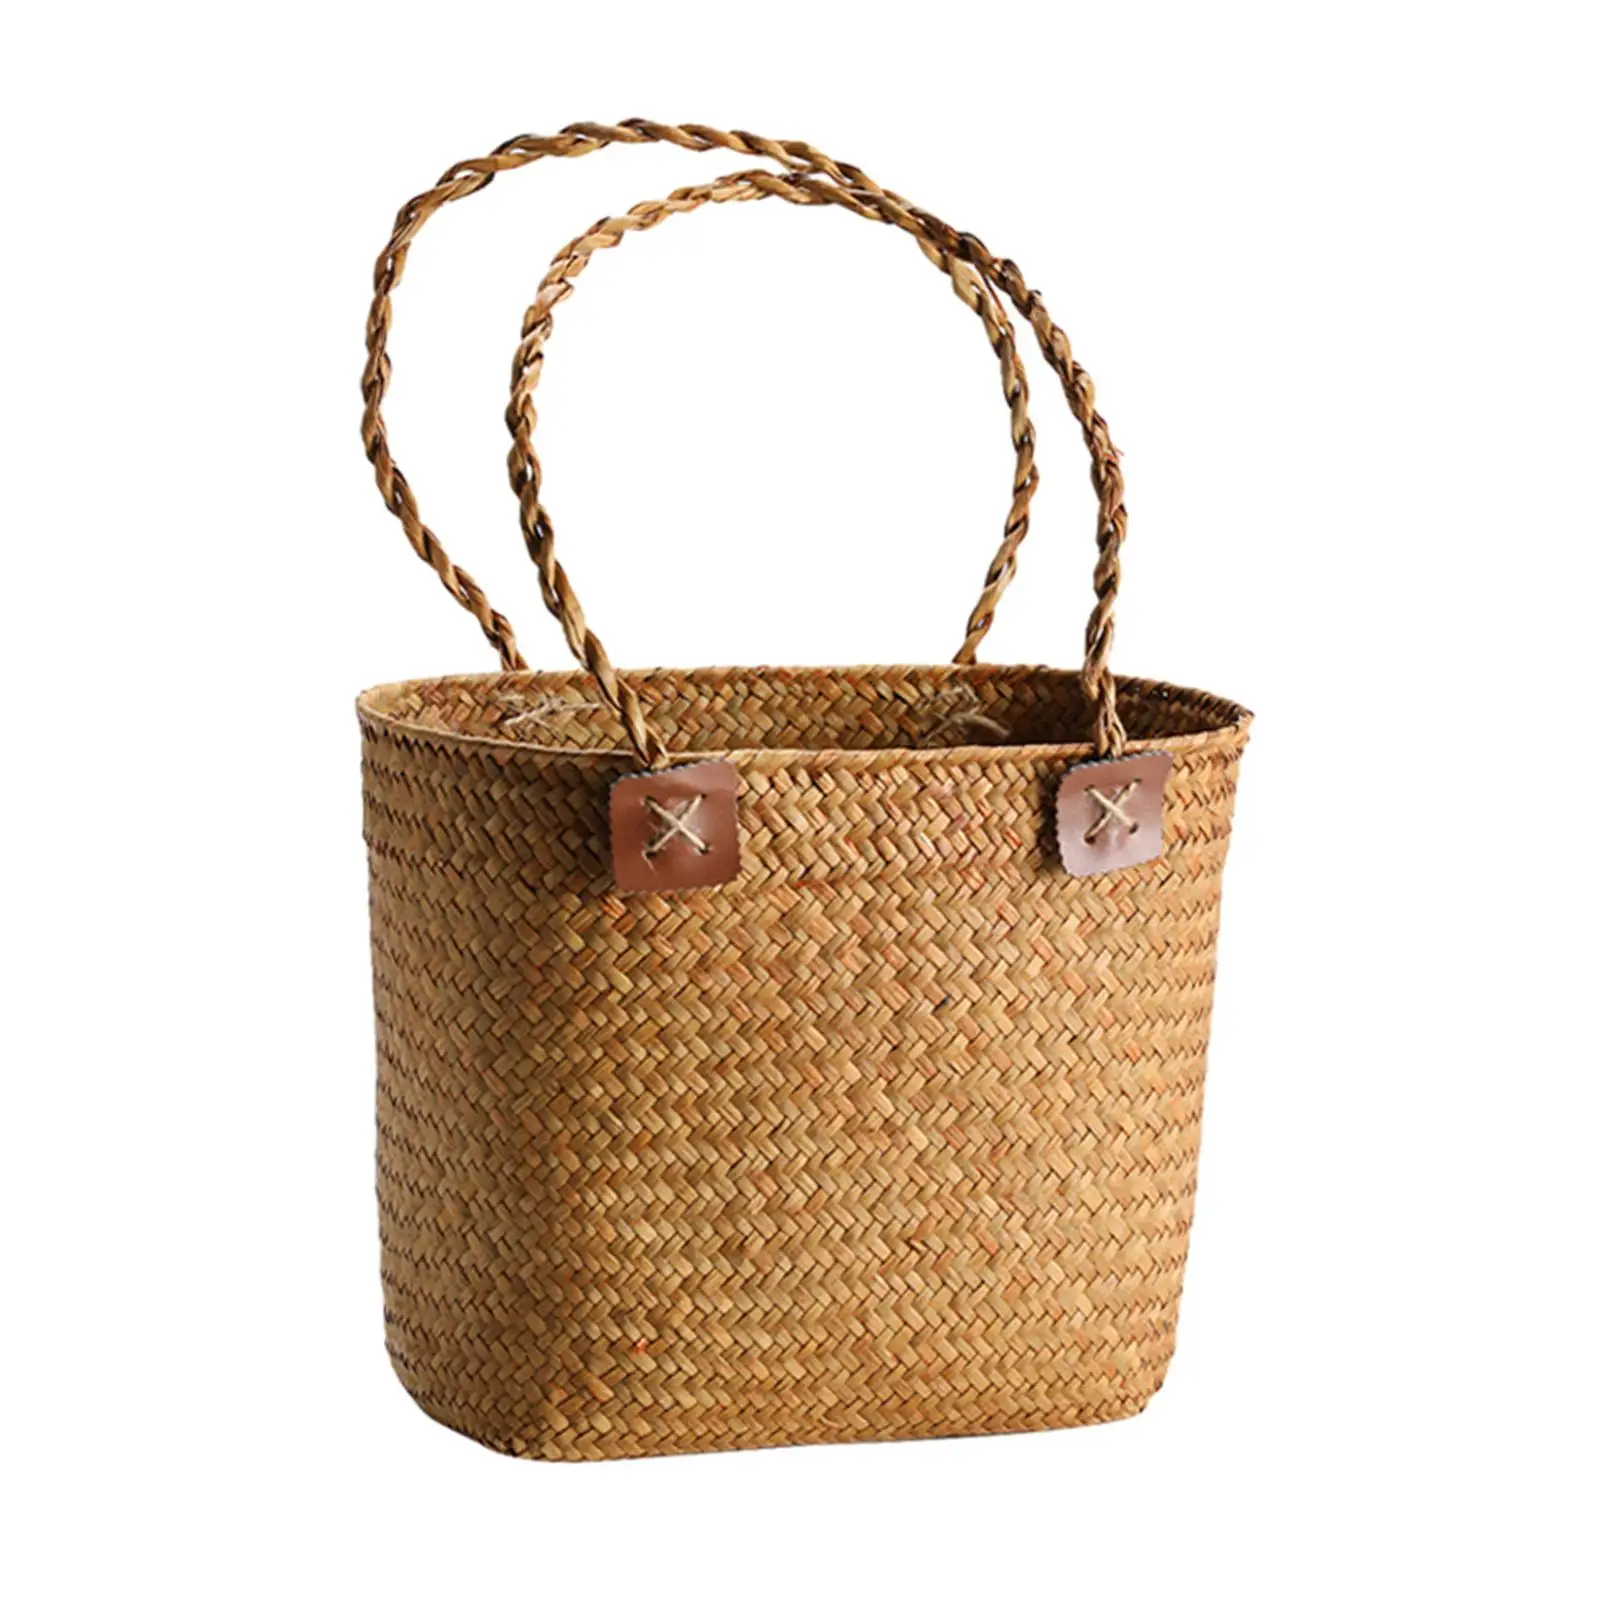 Handwoven Storage Basket, Shopping Grocery Bag Container, Double Handles Lightweight Picnic Basket, Grocery Baskets